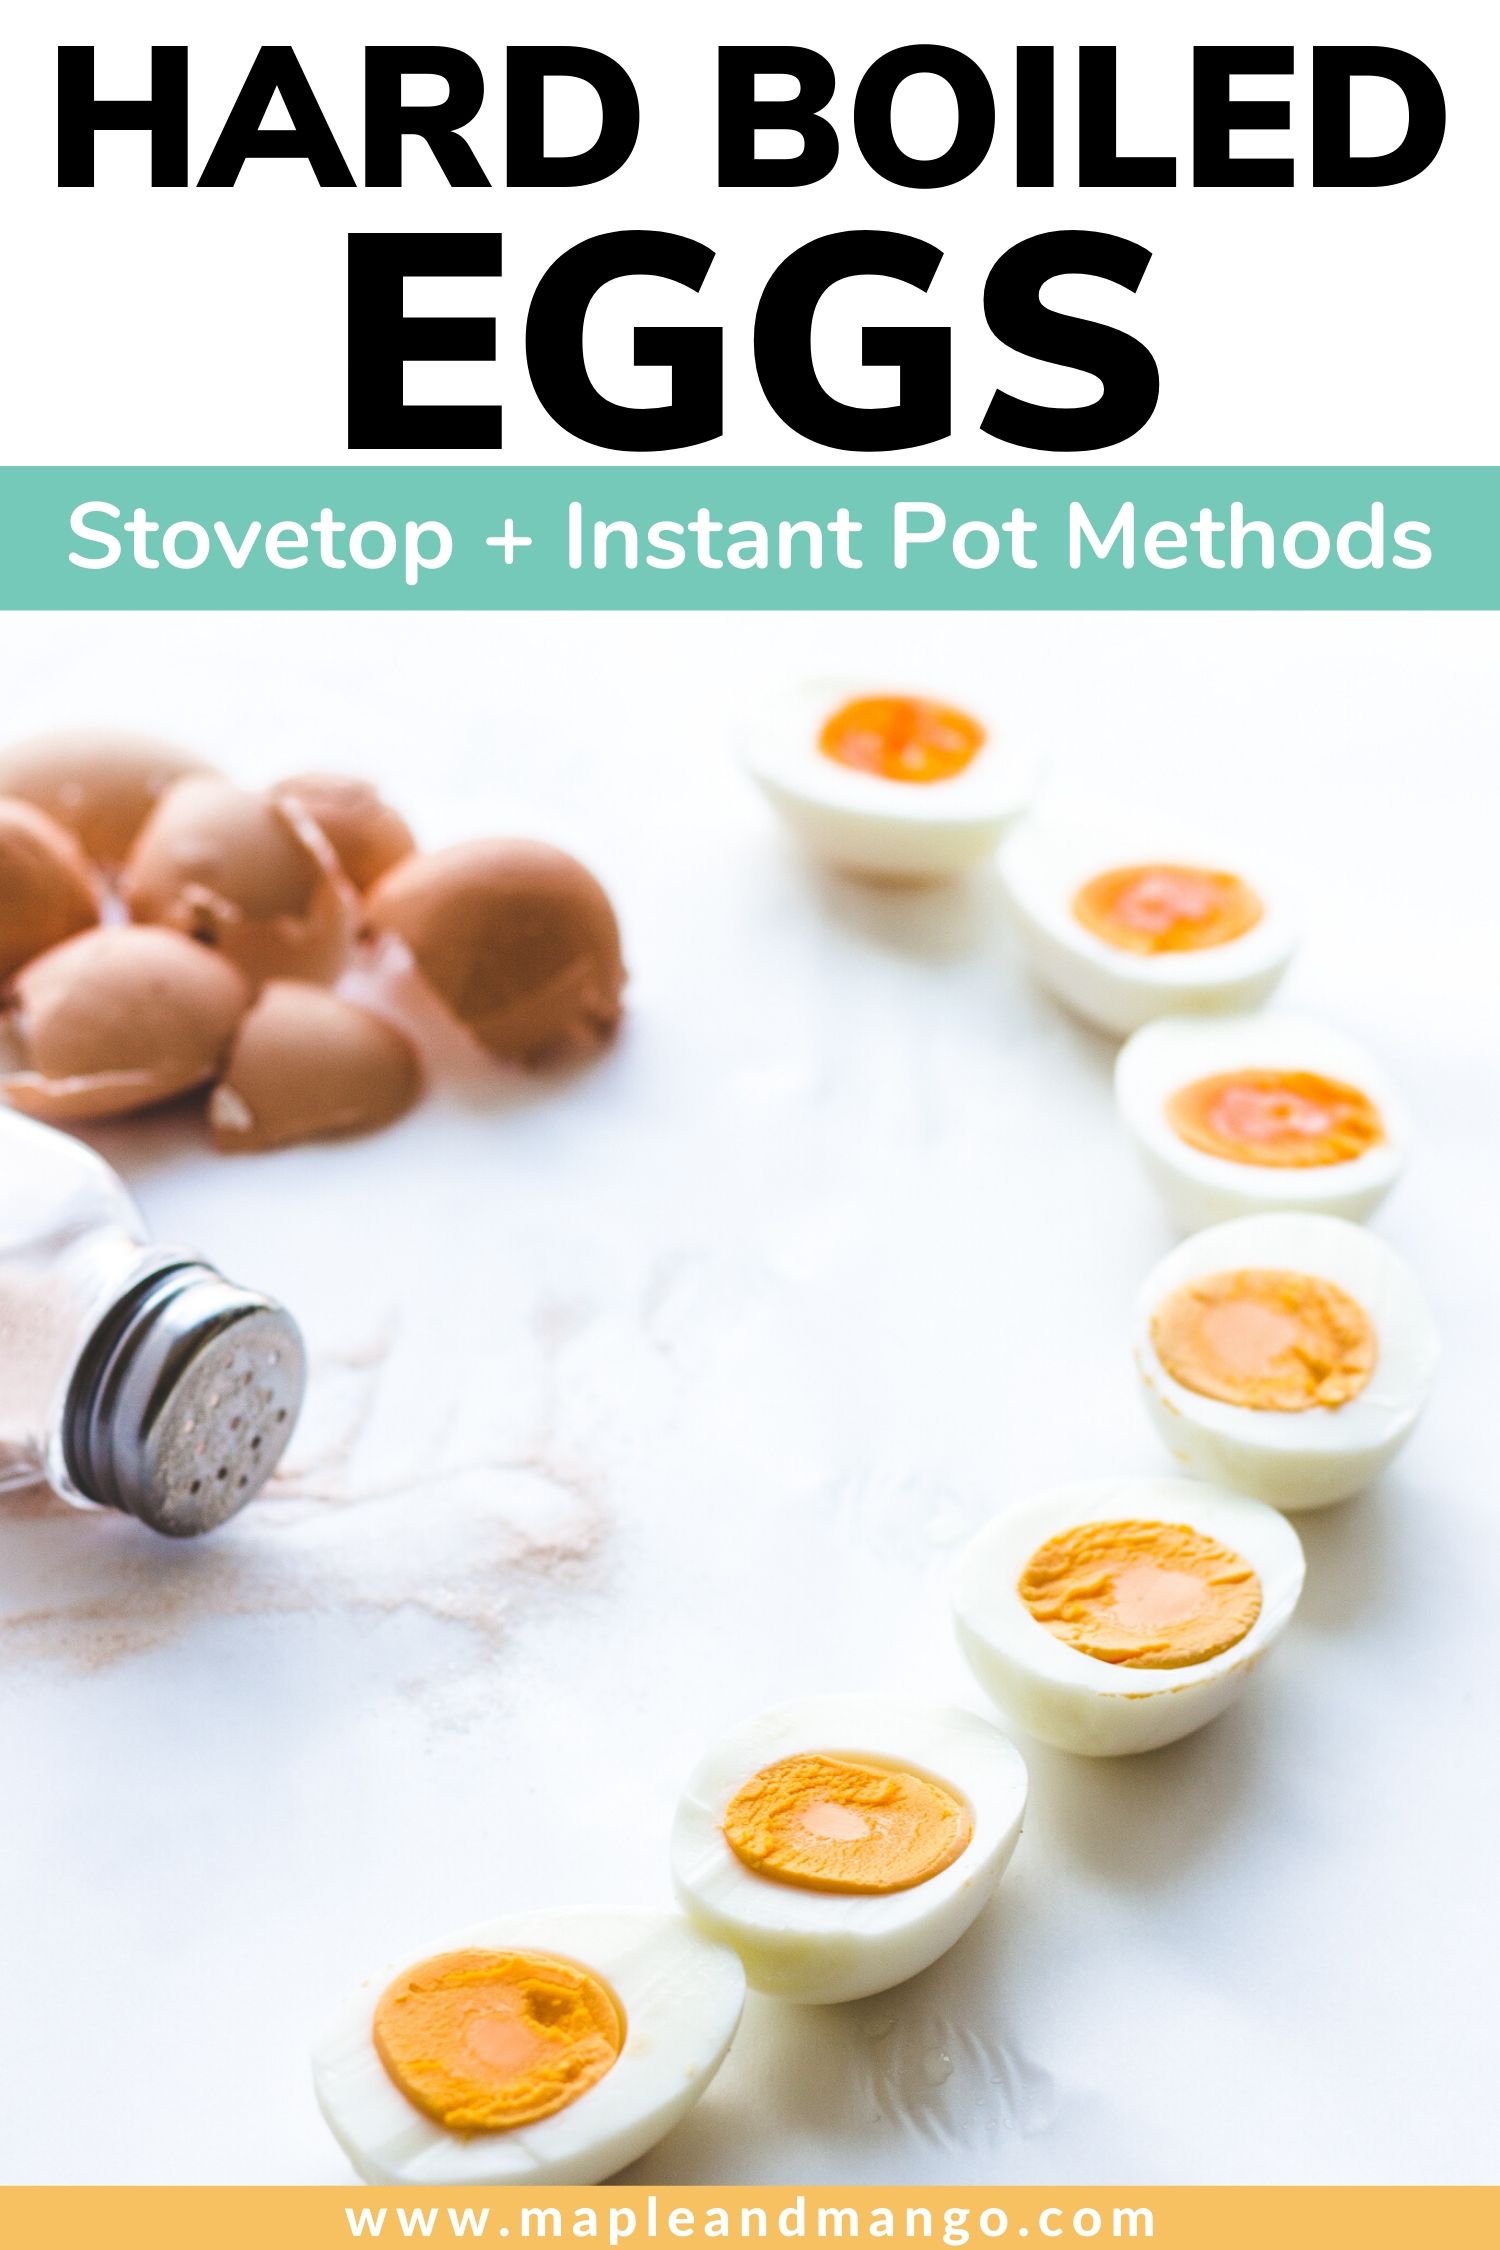 Pinterest graphic for Perfect Hard Boiled Eggs using both the Stovetop and Instant Pot Methods.